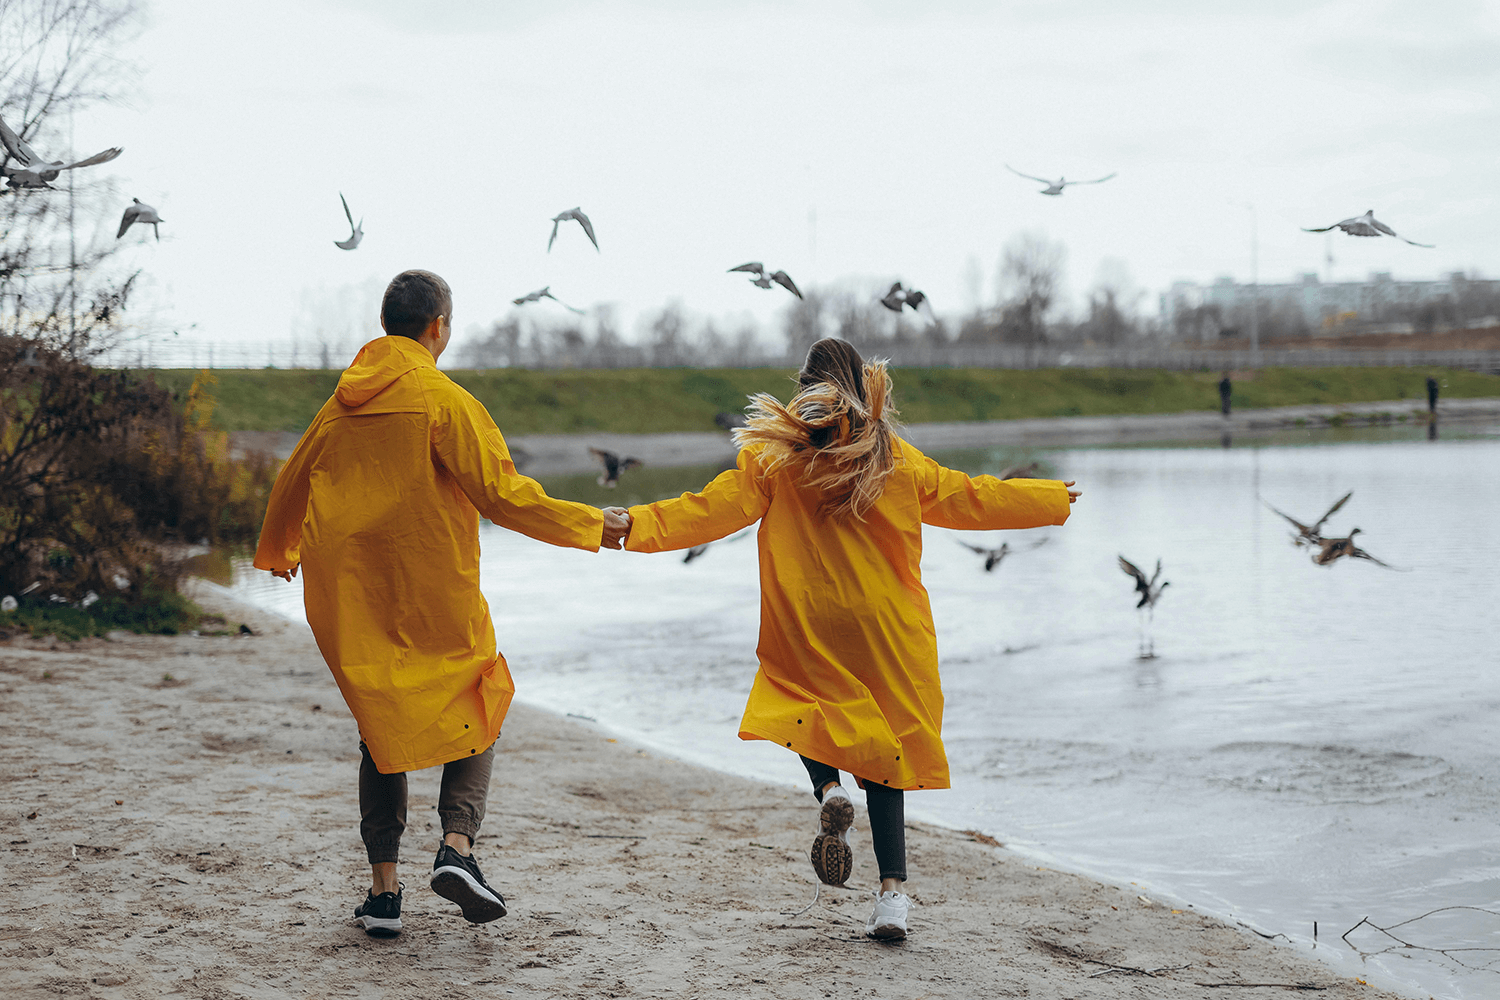 A couple in yellow raincoats running on the shore chasing birds.